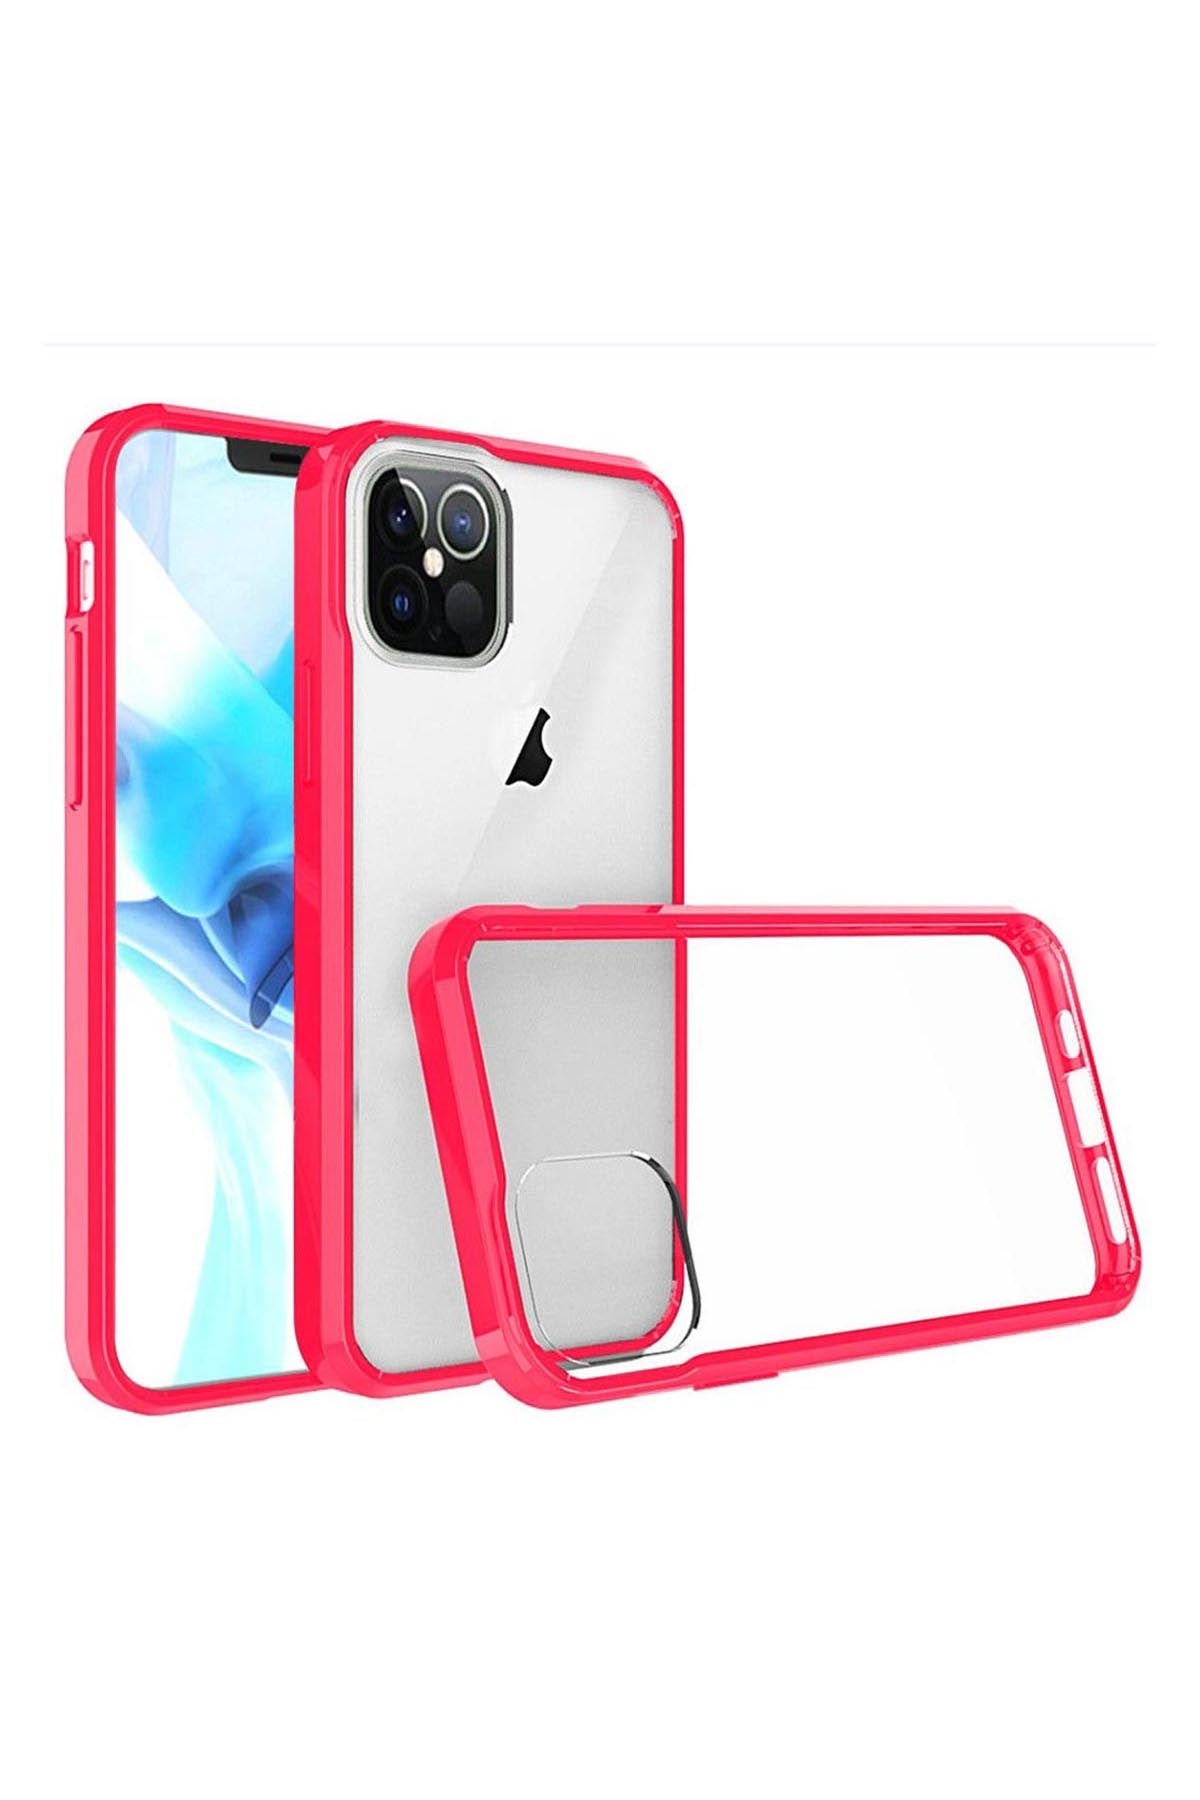 FOR iPHONE 12/PRO (6.1 ONLY) BUMPER CLEAR TRANSPARENT CASE COVER